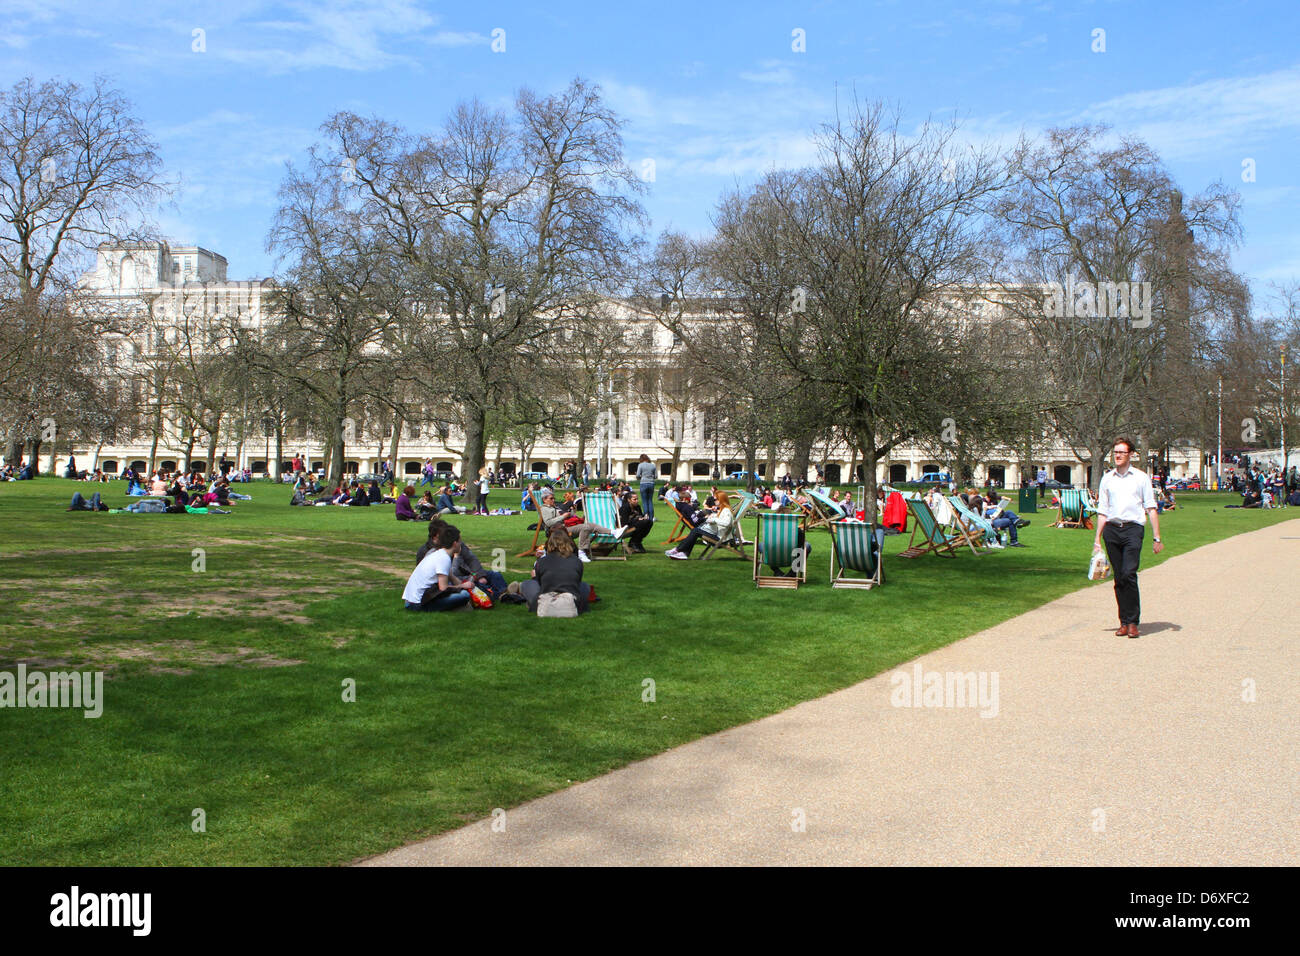 St James Park, London, UK. 24th April 2013. On one of the hottest days of the year so far, the sunshine attracted hundreds to the parks and open spaces this lunchtime Credit: Michael Smith/Alamy Live News Stock Photo